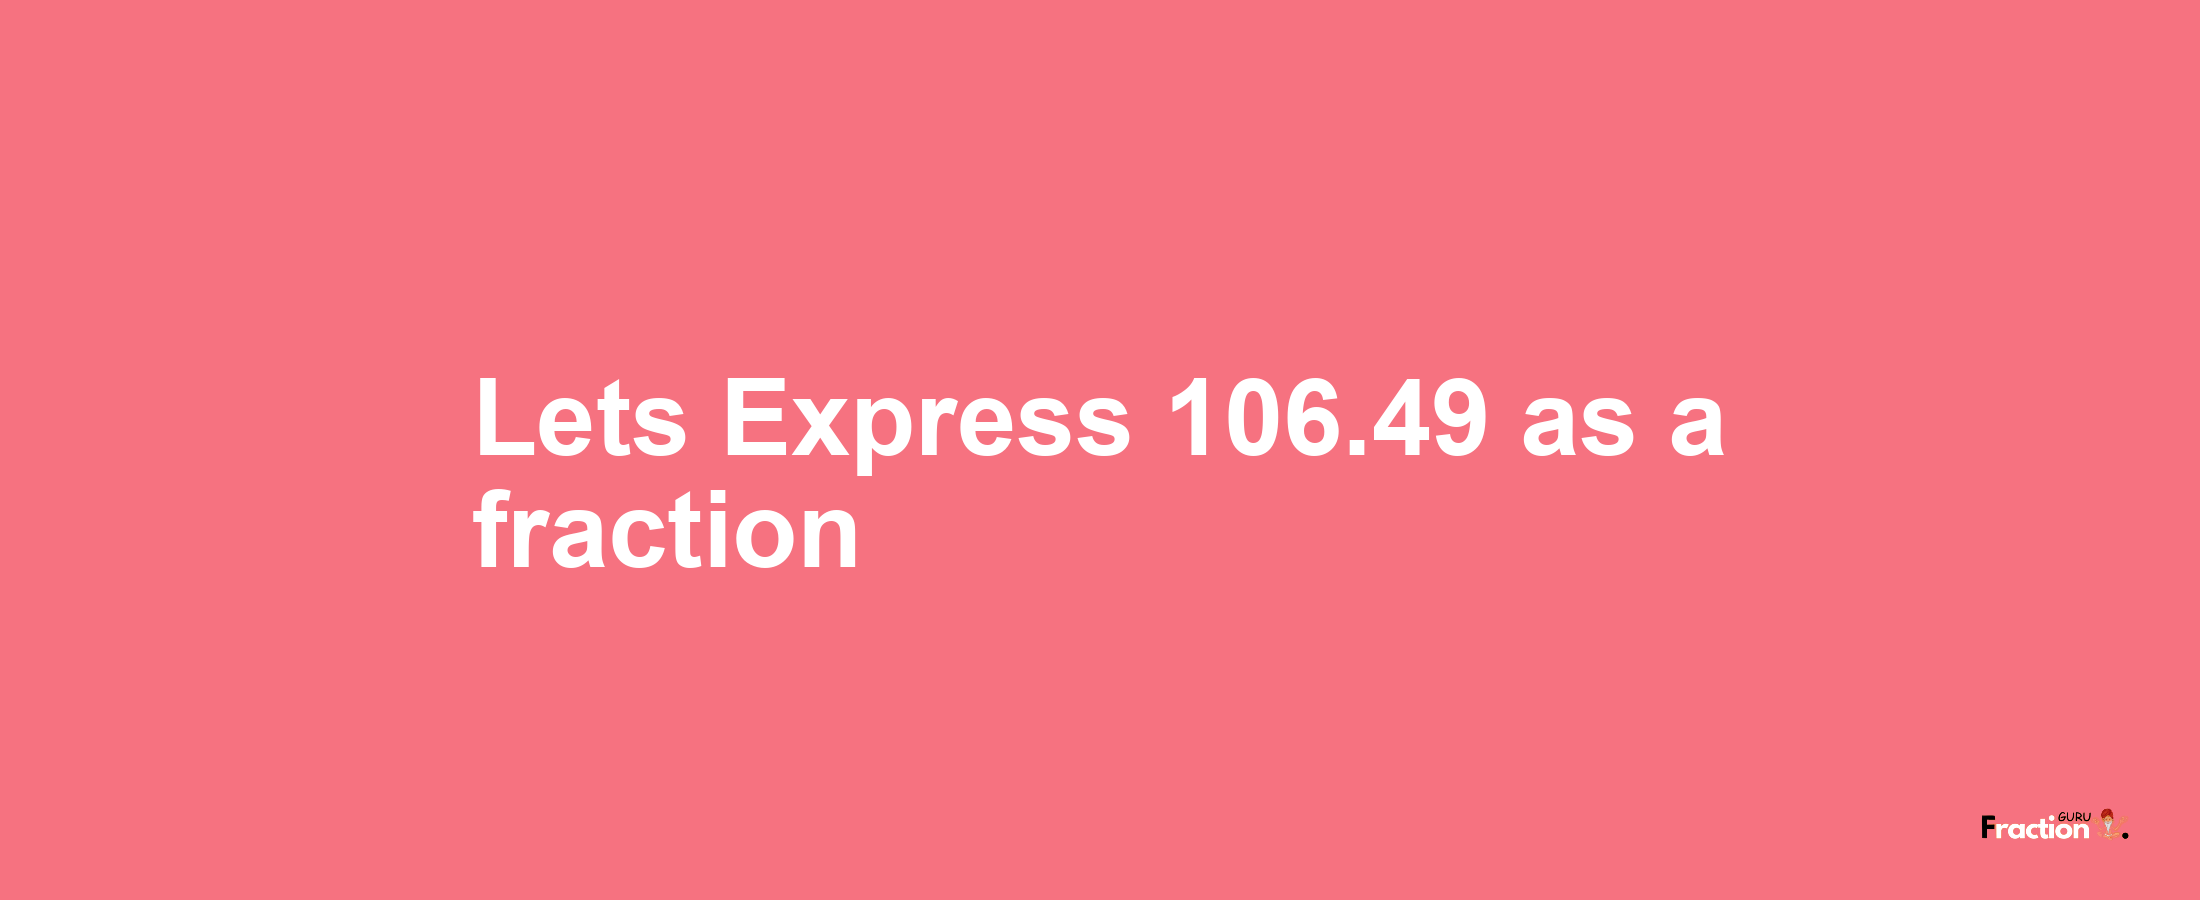 Lets Express 106.49 as afraction